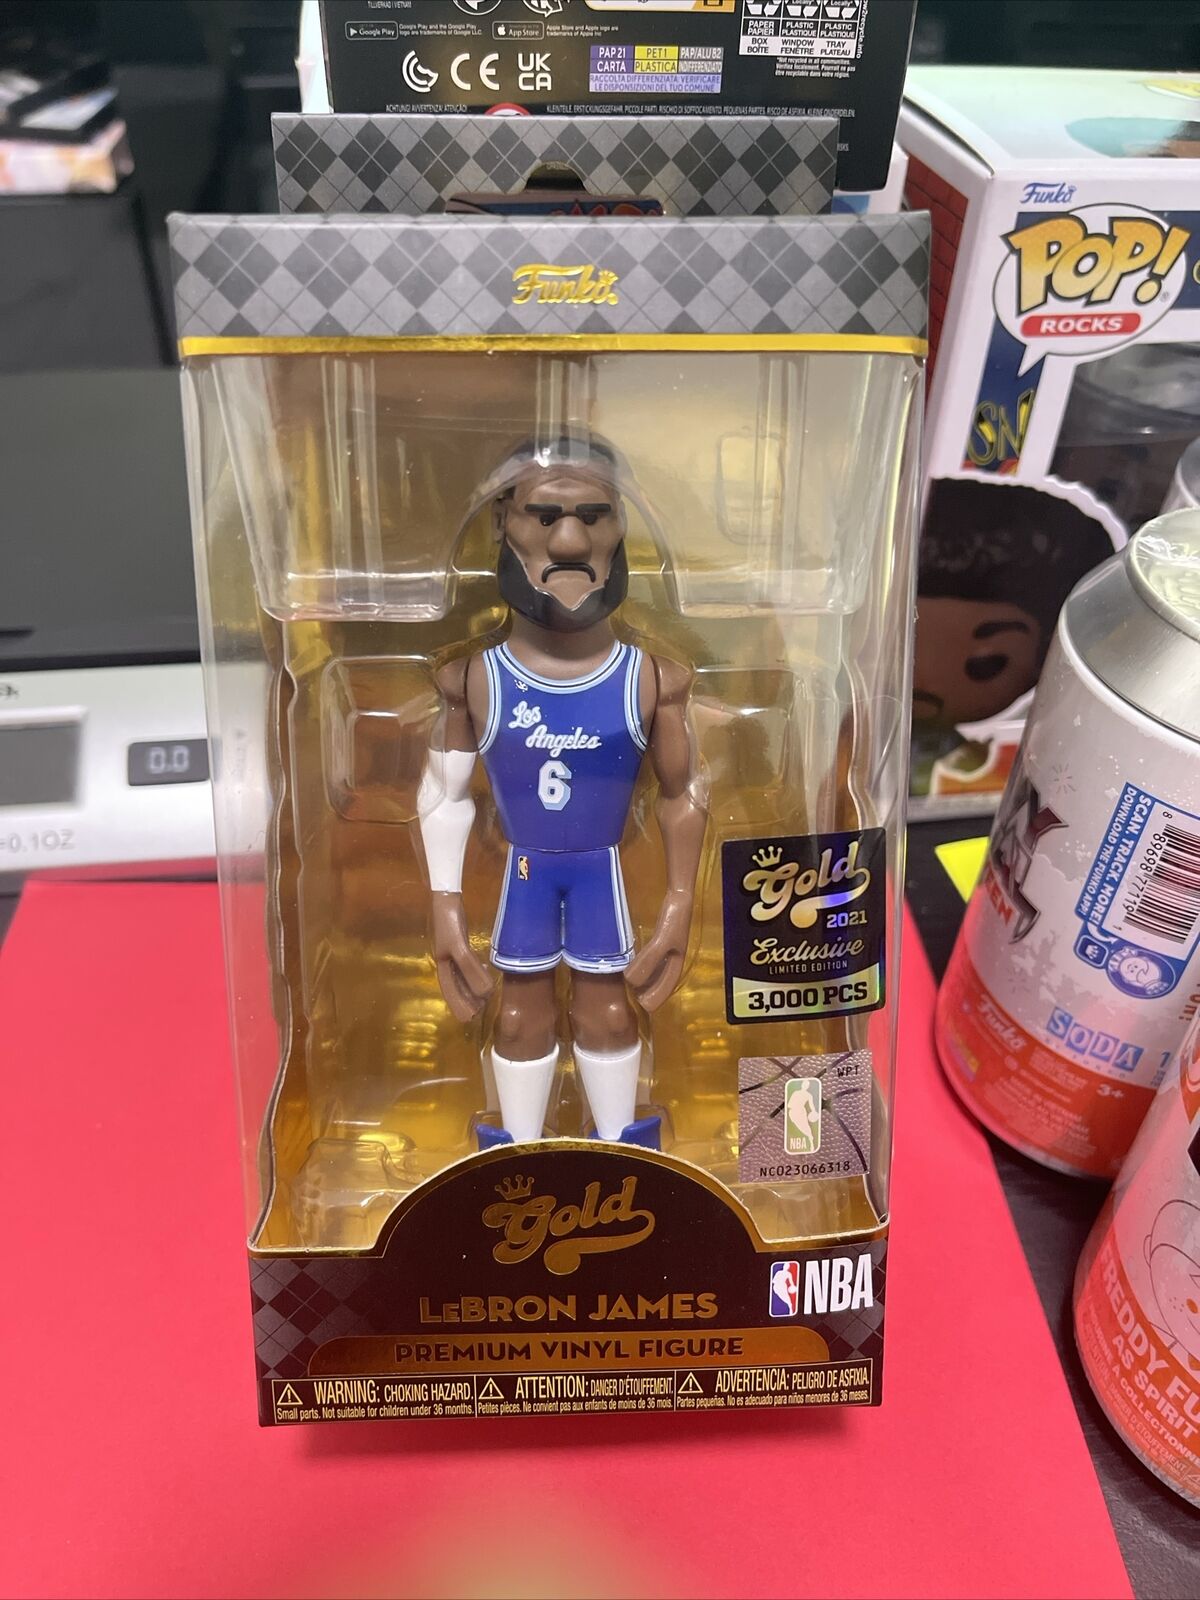 FUNKO GOLD Lebron James 5 in. Vinyl Figure, Limited Edition 3000 Pcs Blue Jersey